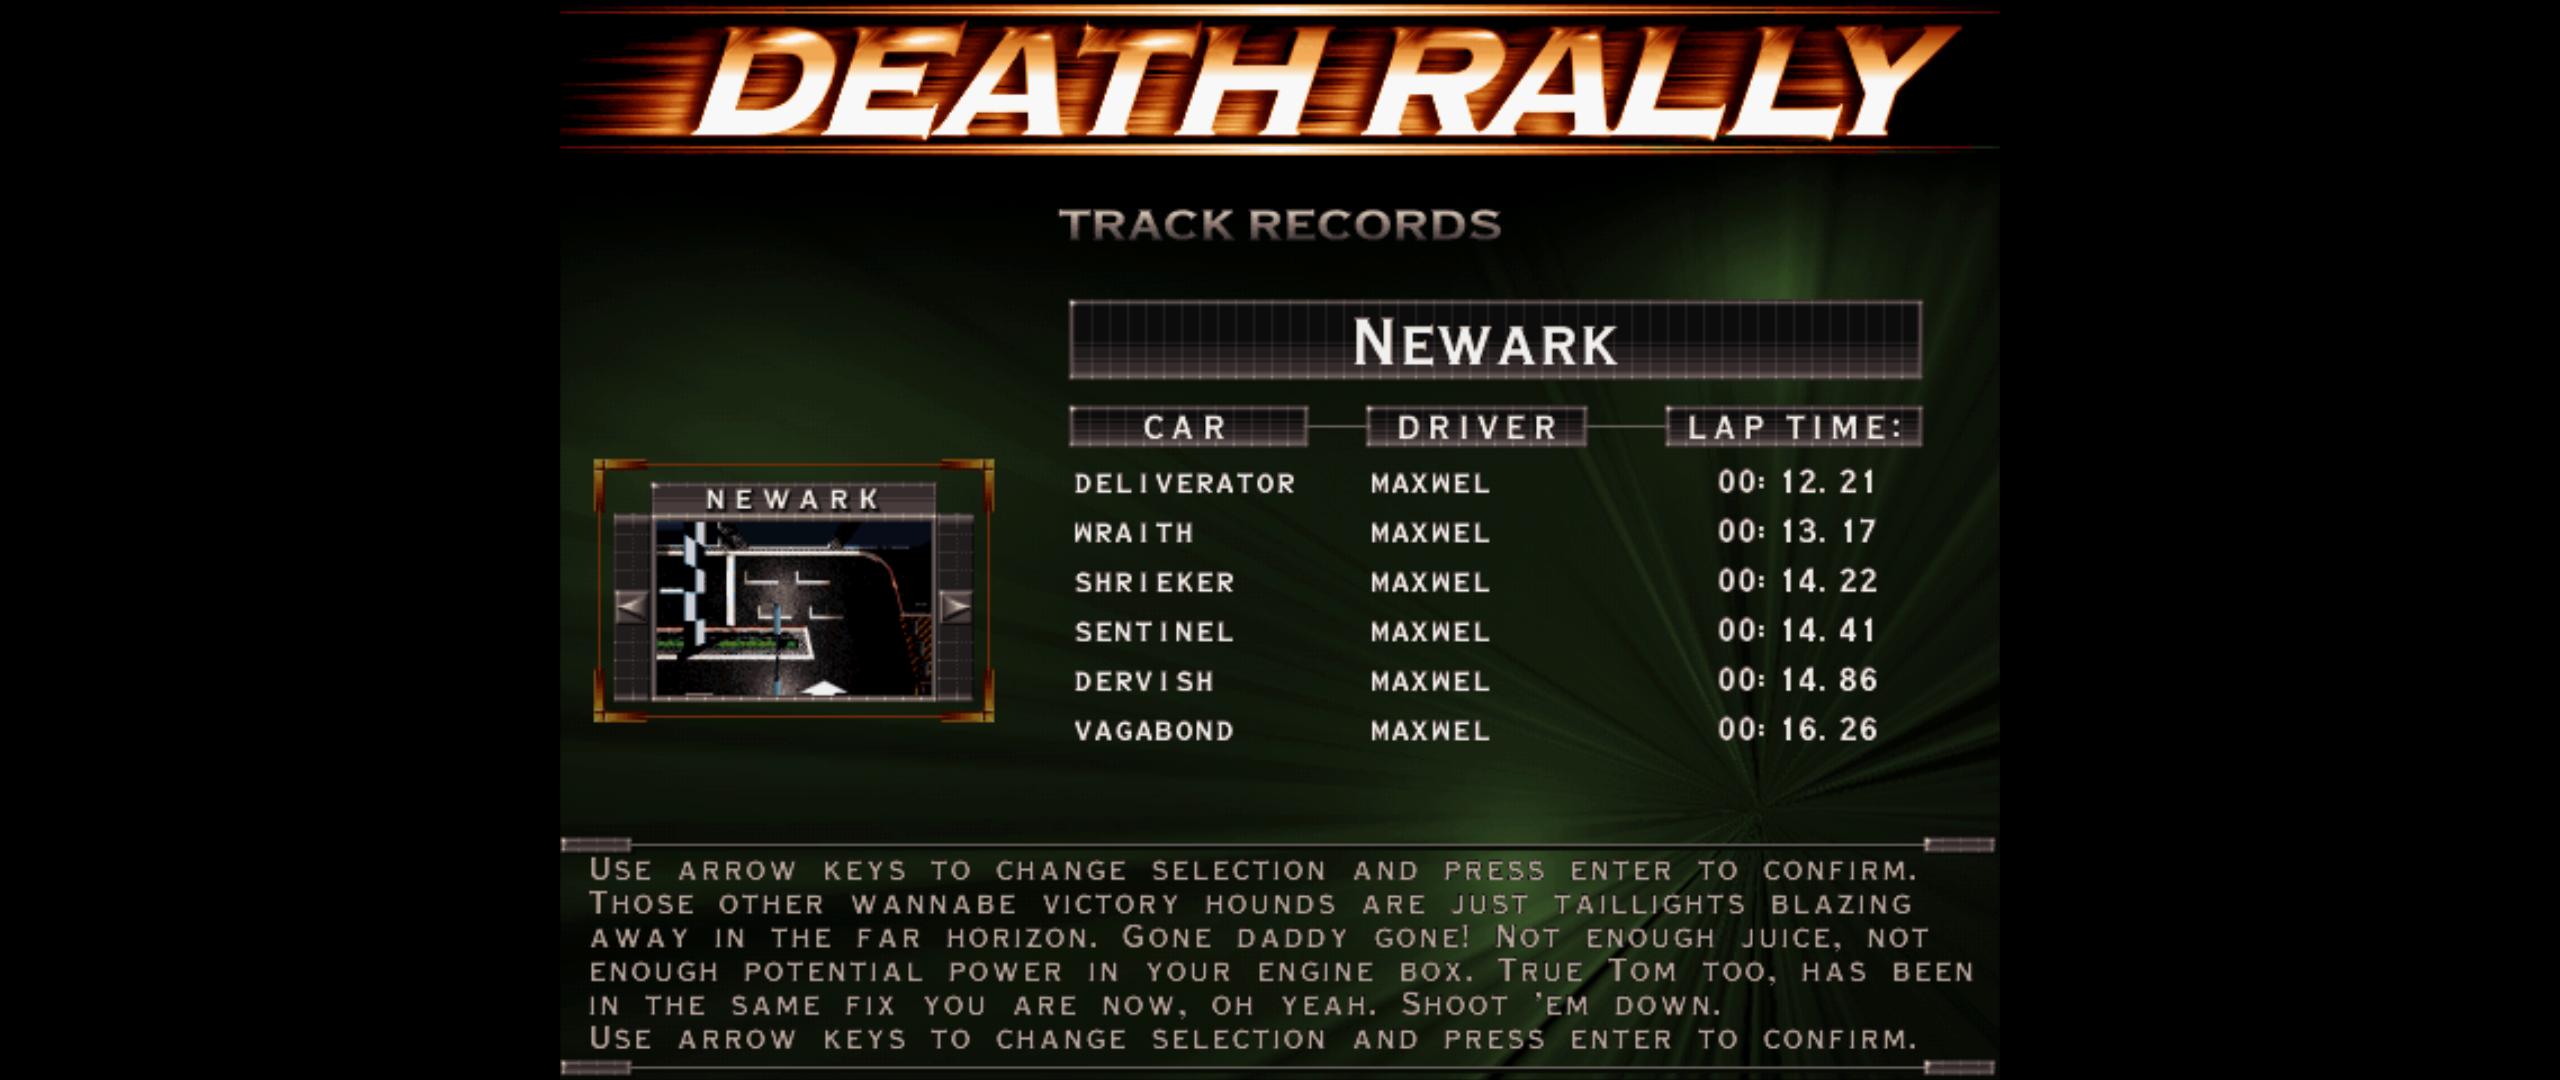 Maxwel: Death Rally [New Ark, Deliverator Car] (PC) 0:00:12.21 points on 2016-03-04 07:05:16